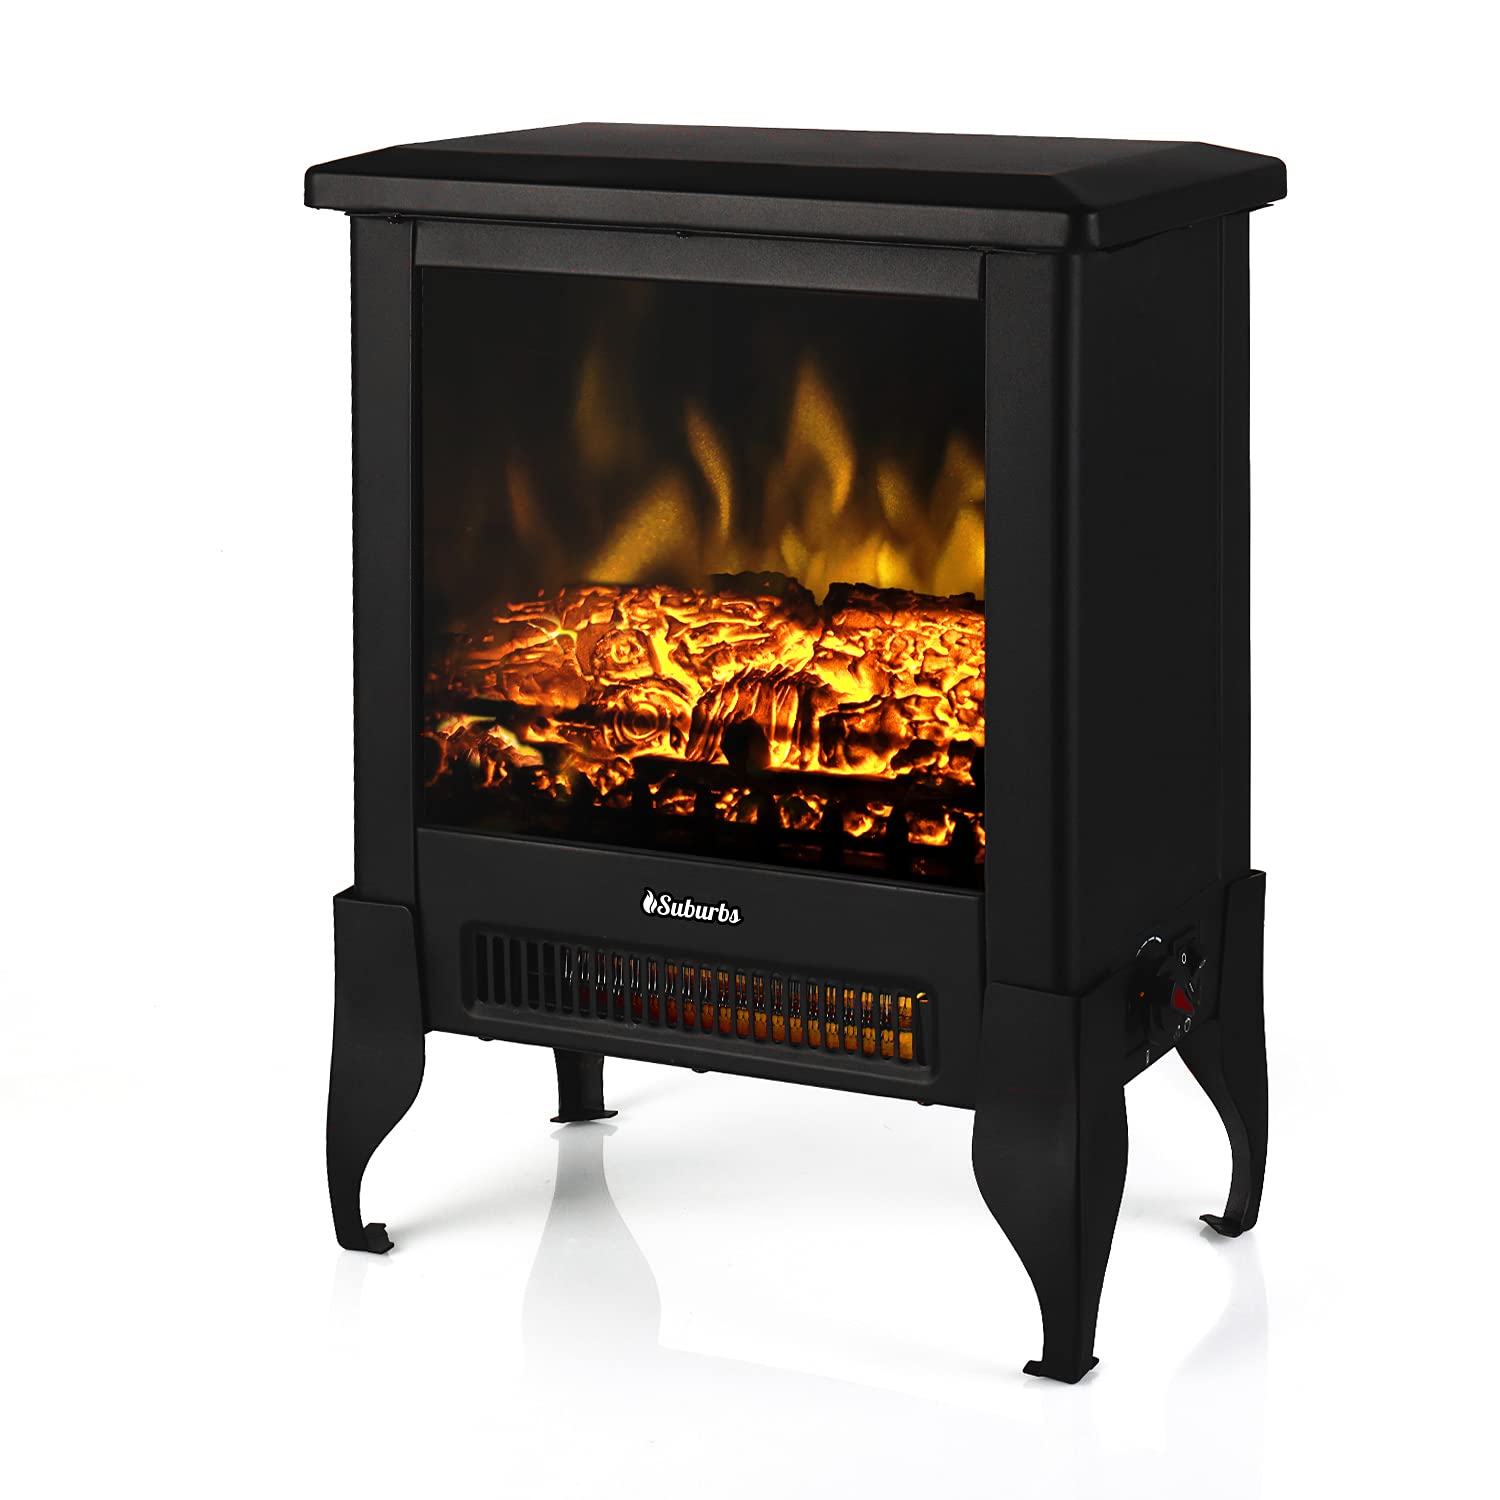 TURBRO Suburbs TS17Q Infrared Electric Fireplace Stove